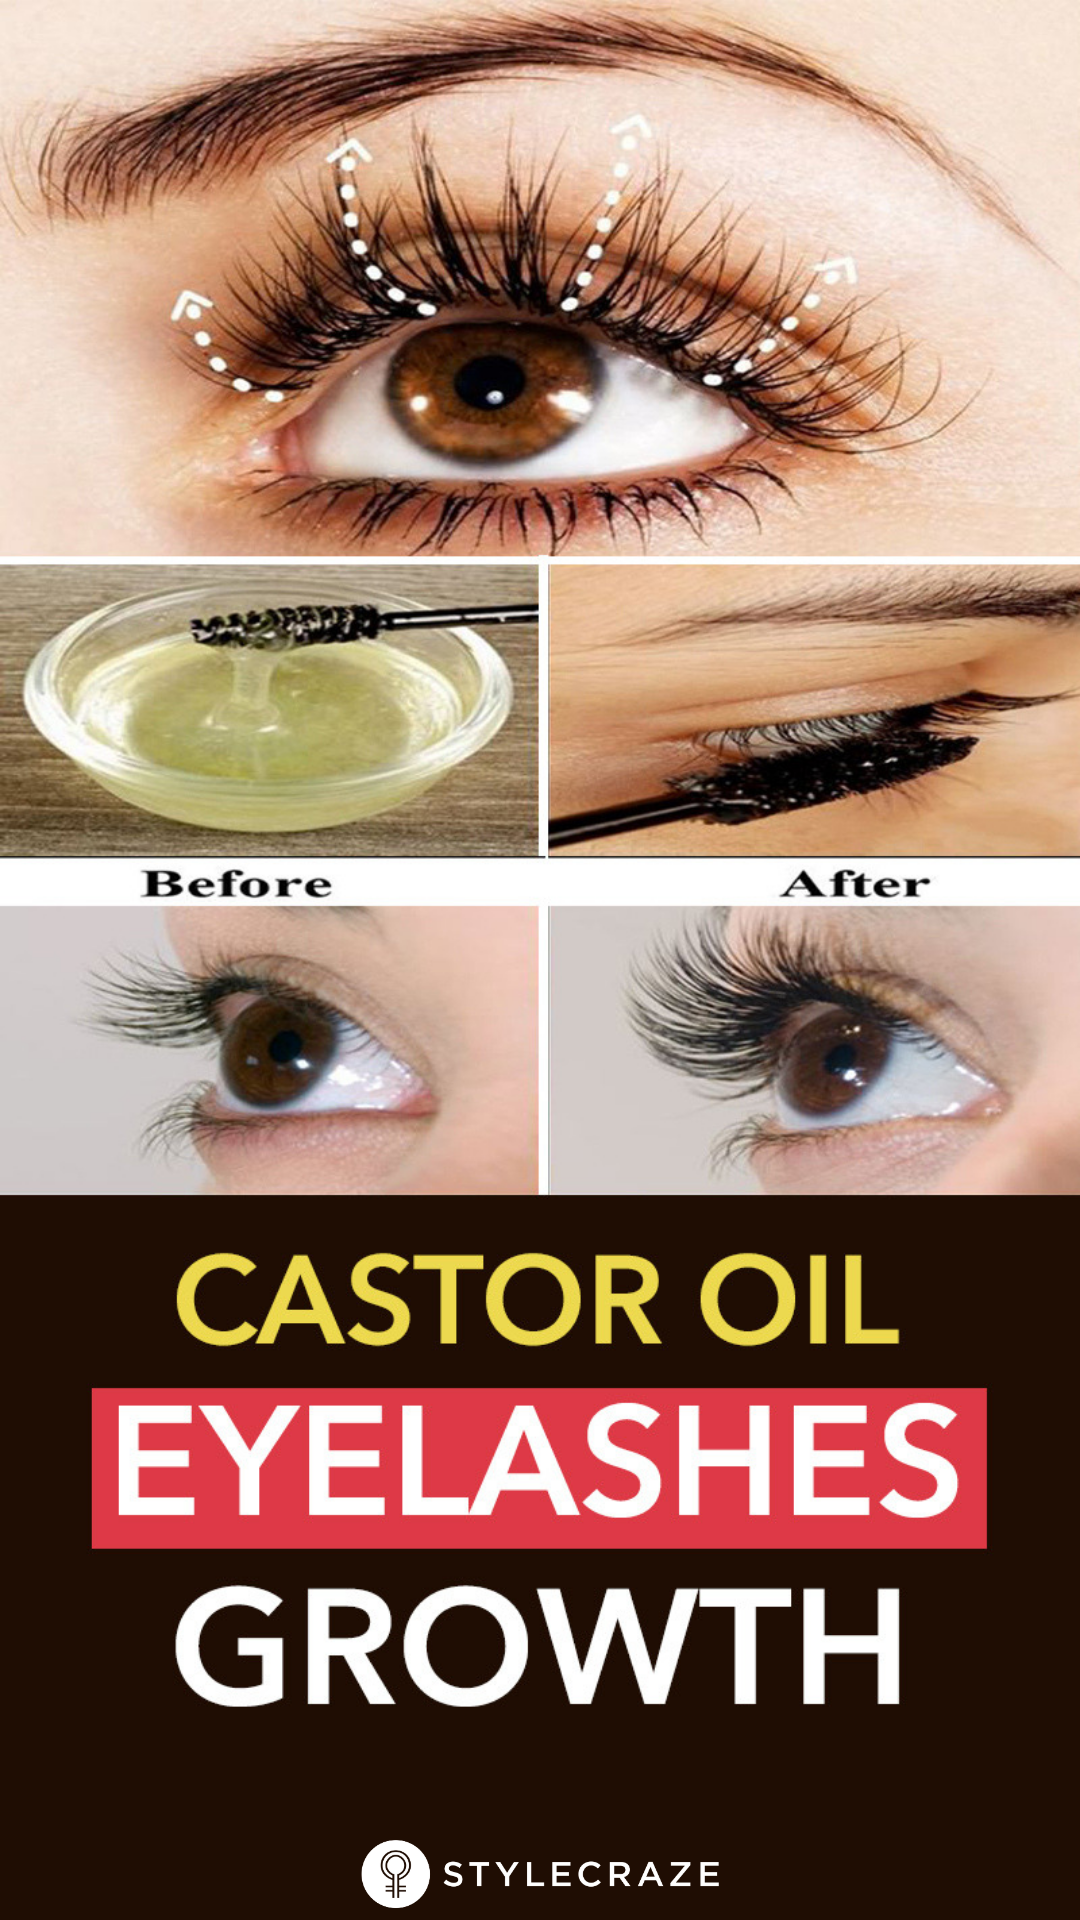 How To Use Castor Oil For Eyelashes Growth? - 5 Best DIY Methods - How To Use Castor Oil For Eyelashes Growth? - 5 Best DIY Methods -   15 beauty Hacks lashes ideas